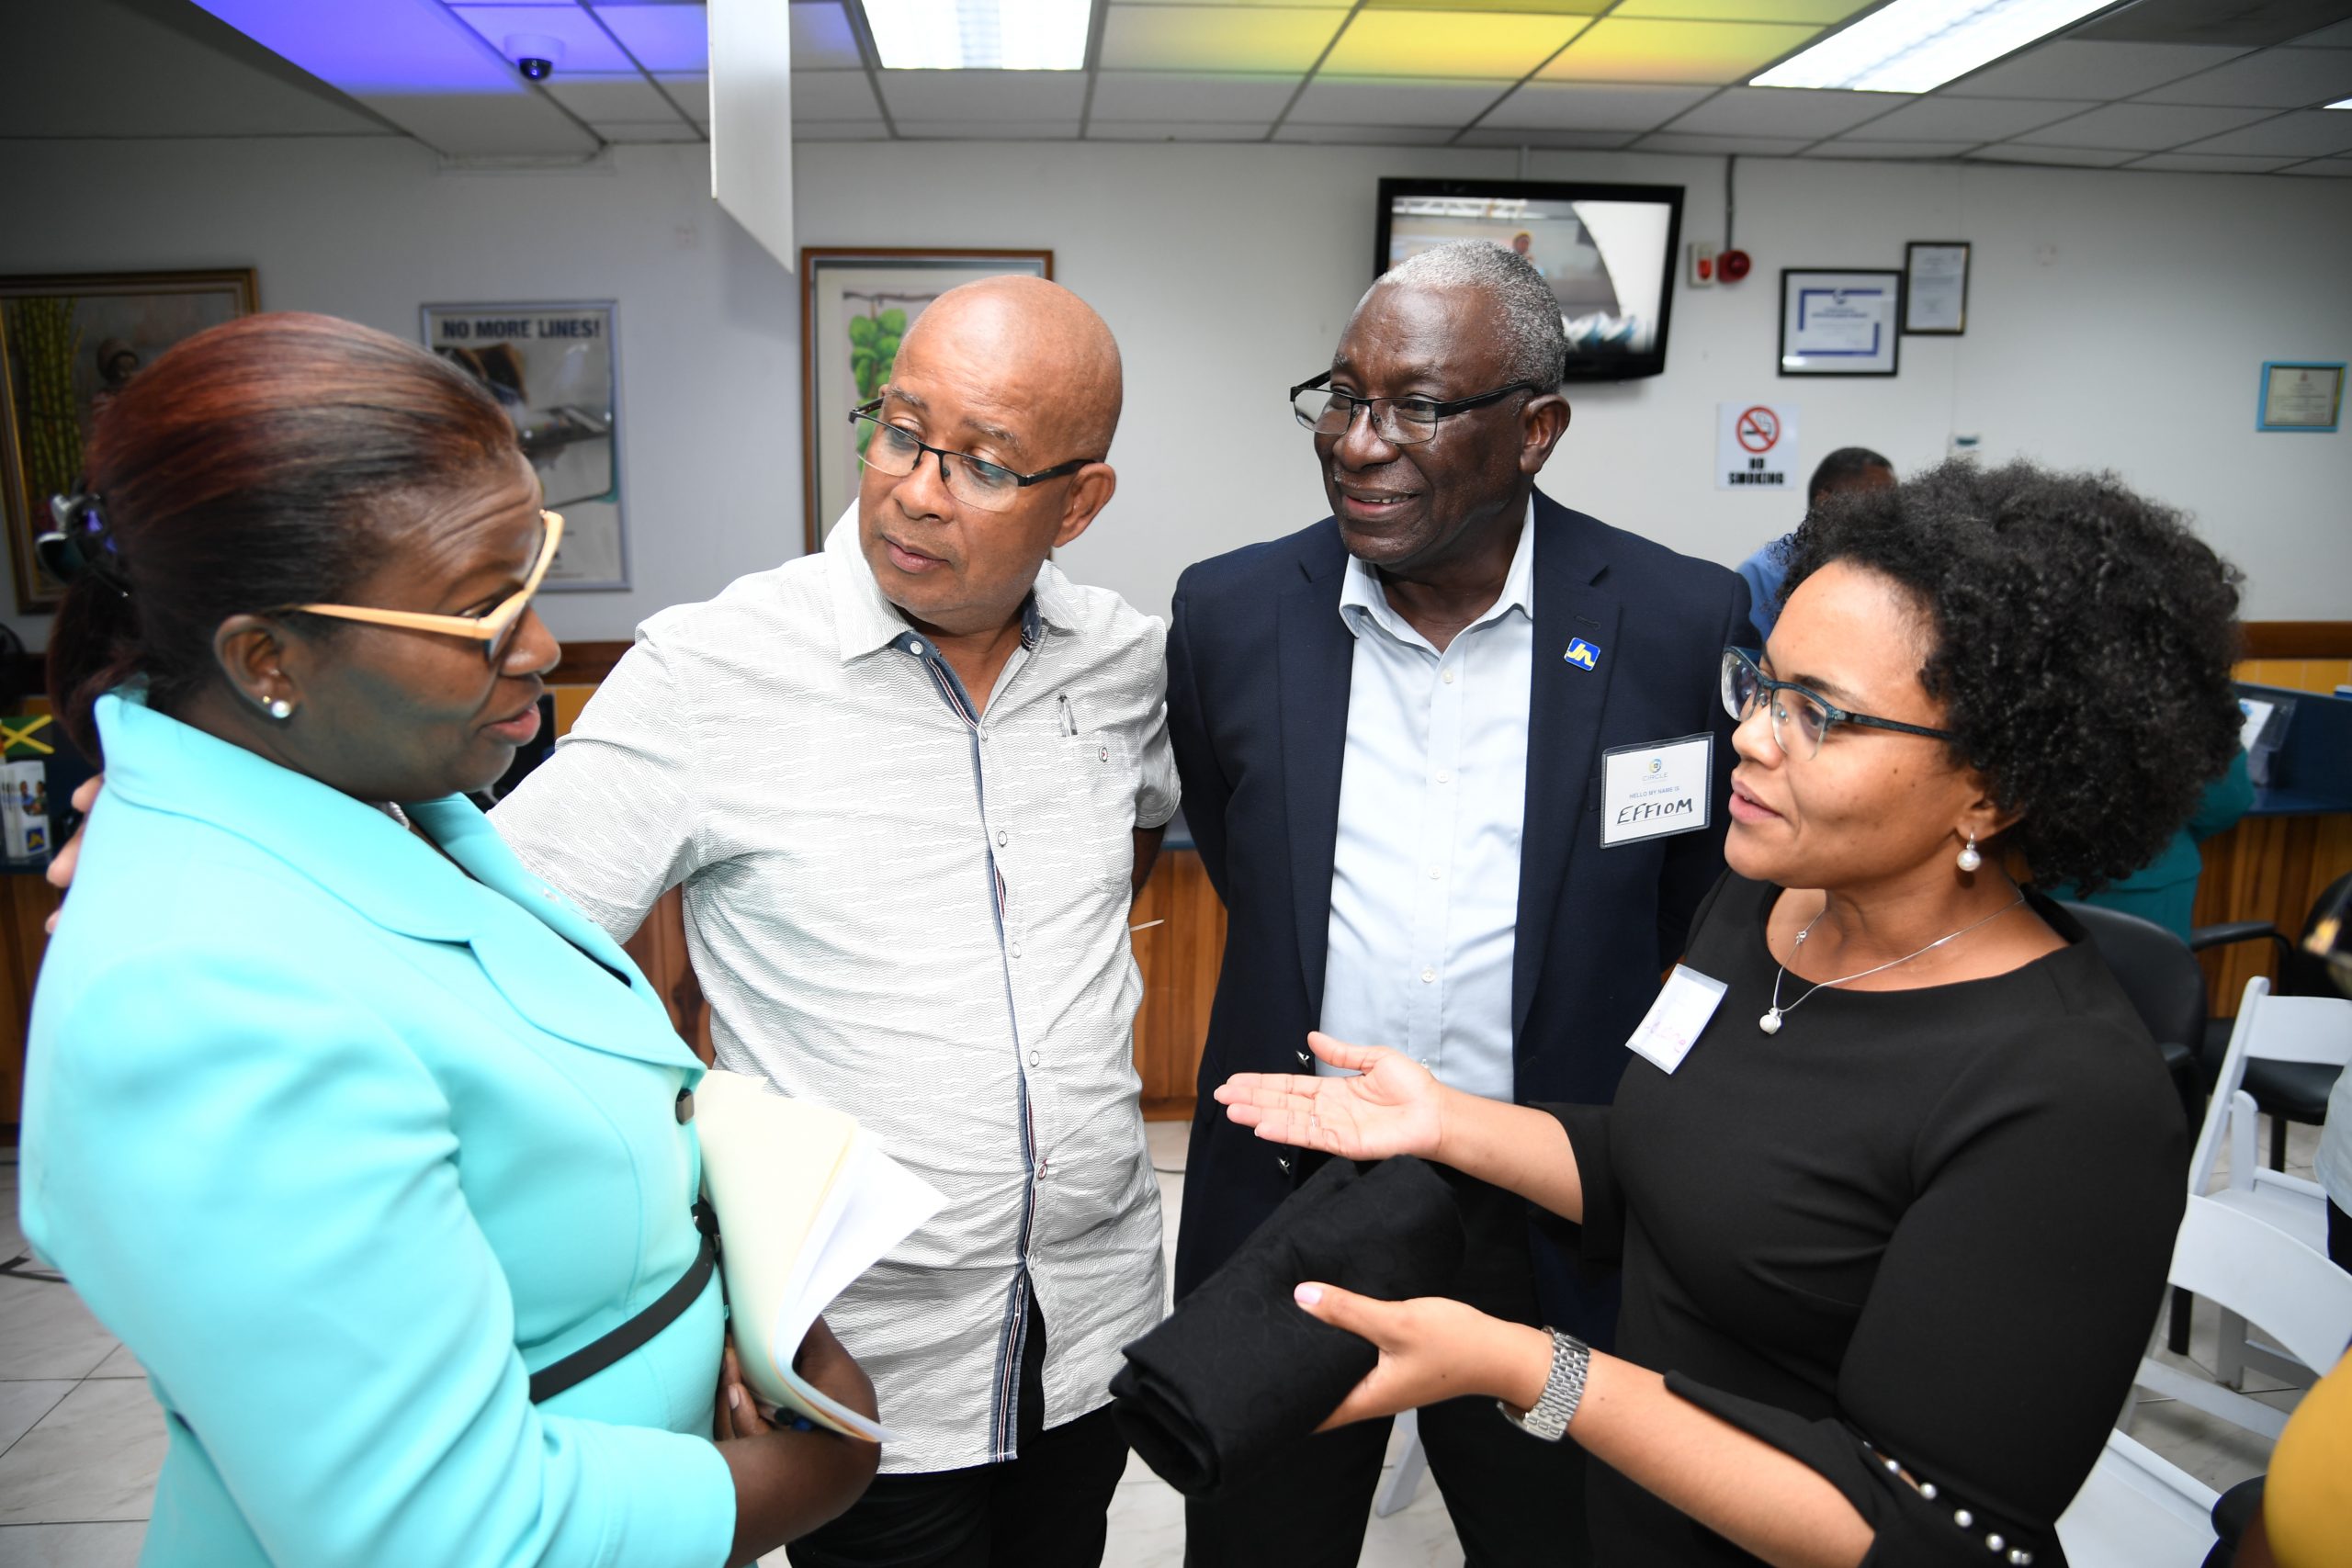 Claudine Allen (right), member ombudsman, at The Jamaica National Group makes a point to Michelle Hines (left), Business Relationship and Sales Manager at JN Bank at the inaugural meeting of the JN Circle, Spanish Town. Looking on are Councillor Norman Scott (second left), Mayor of Spanish Town and Major Effiom Whyte, member relations coordinator with JN Group.